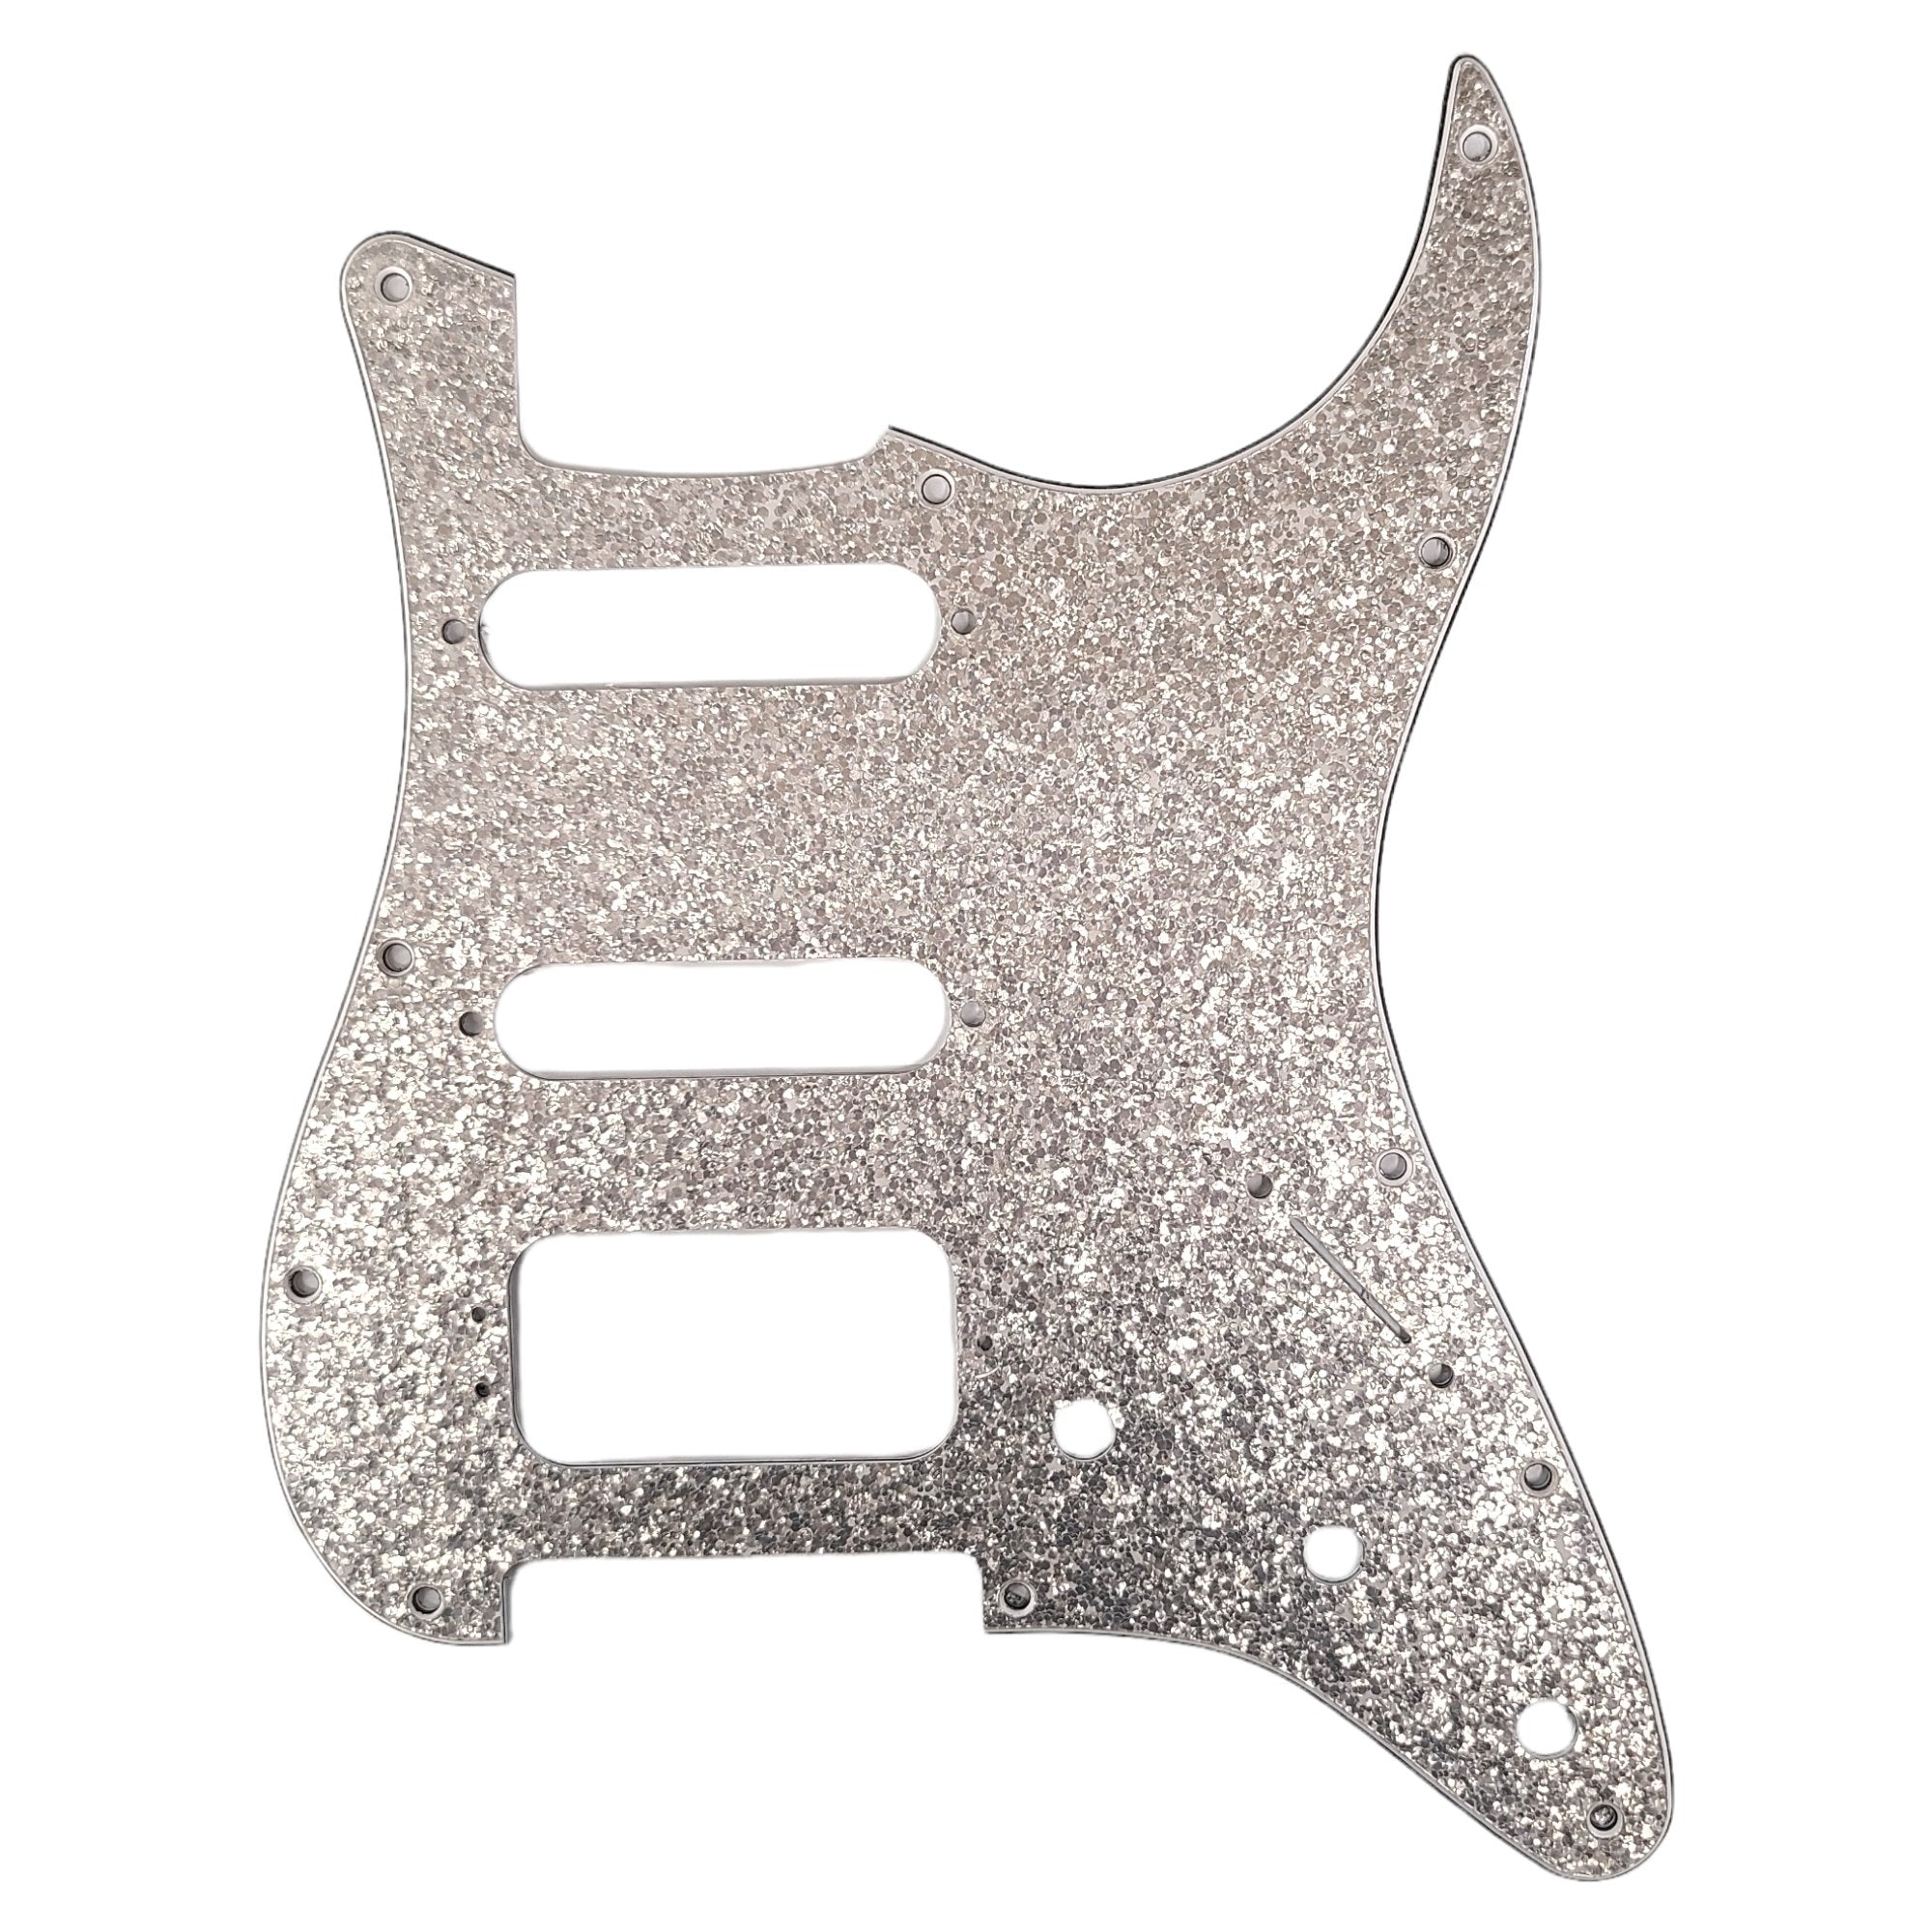 D’Andrea Stratocaster HSS Pickguards for Electric Guitar